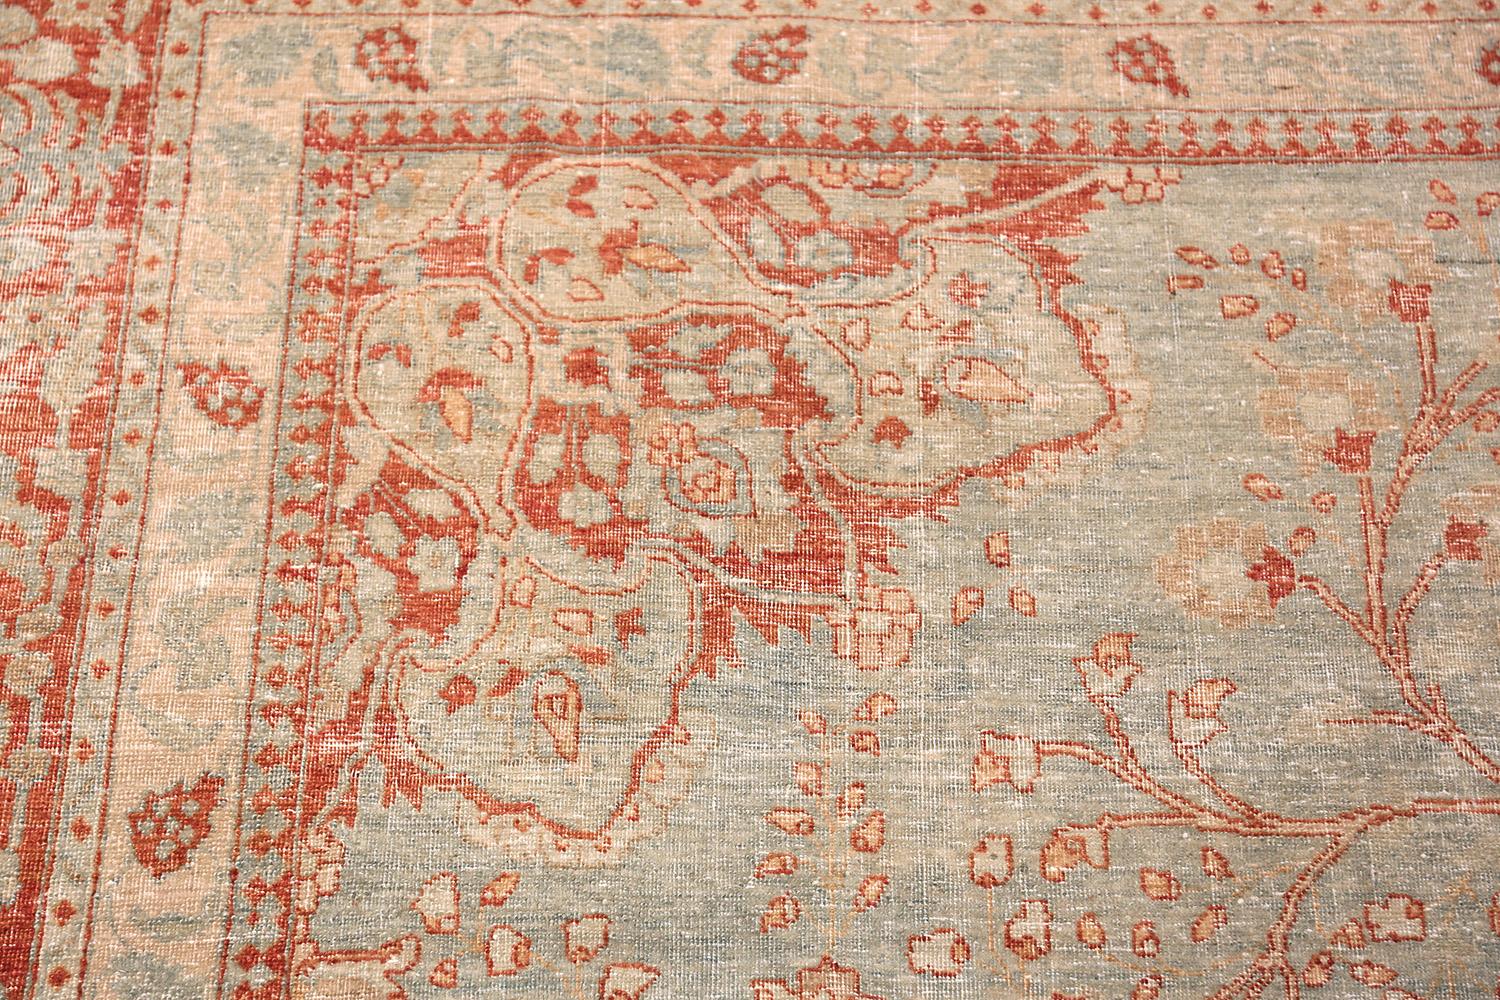 Hand-Knotted Light Blue Shabby Chic Antique Persian Tabriz Rug. Size: 8 ft 4 in x 10 ft 7 in